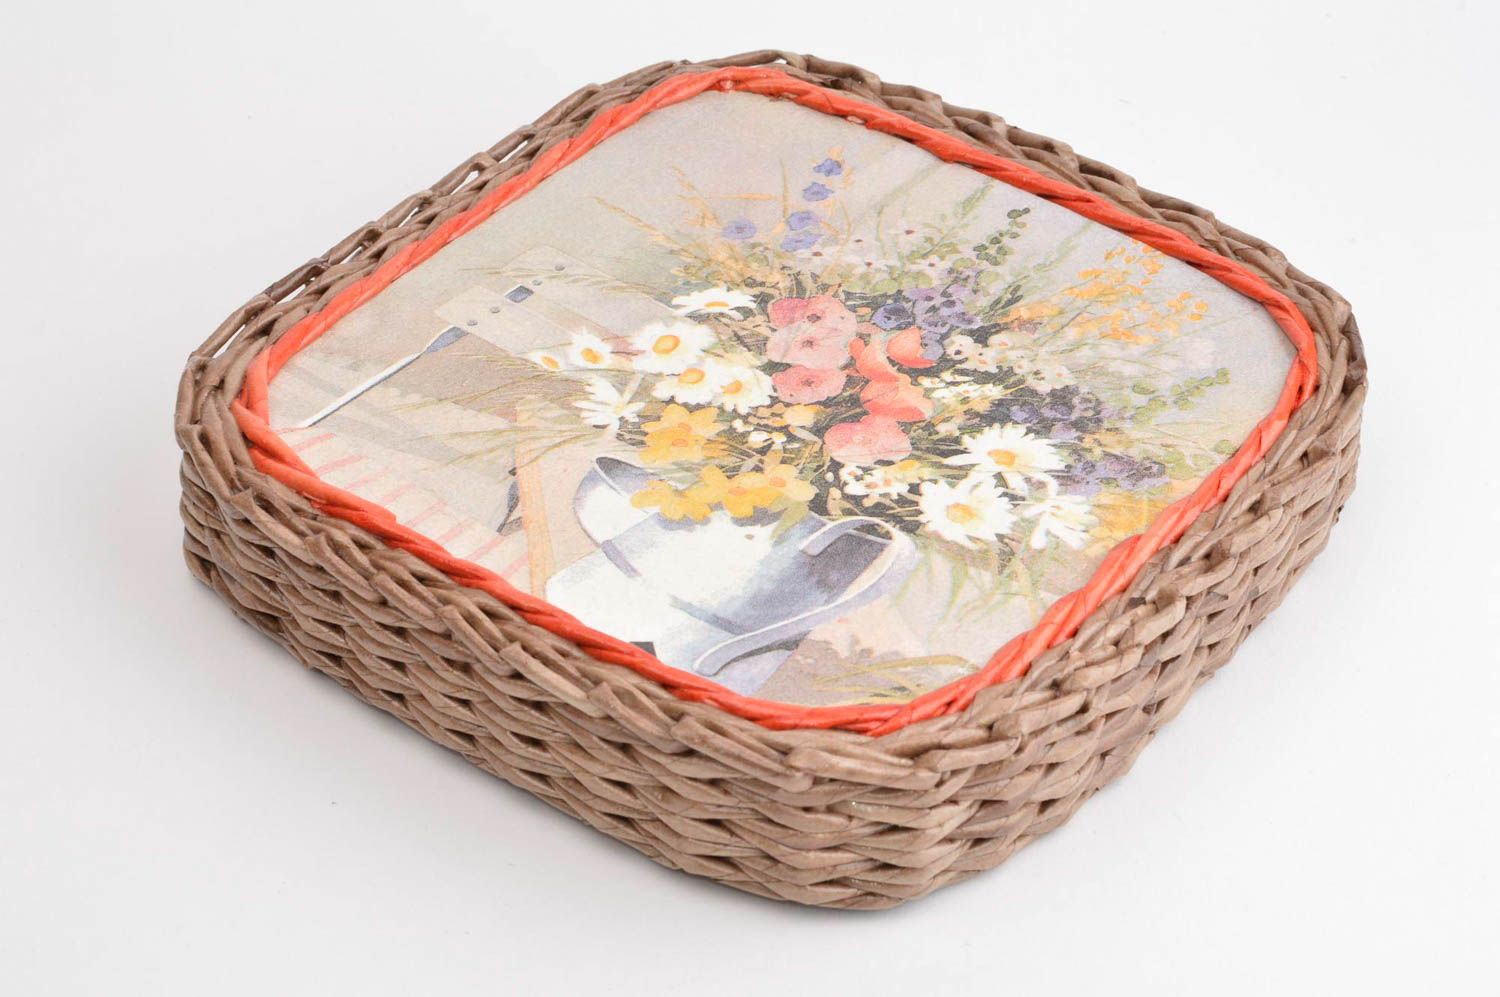 Handmade tray unusual stand gift ideas paper tray for kitchen decor ideas photo 4